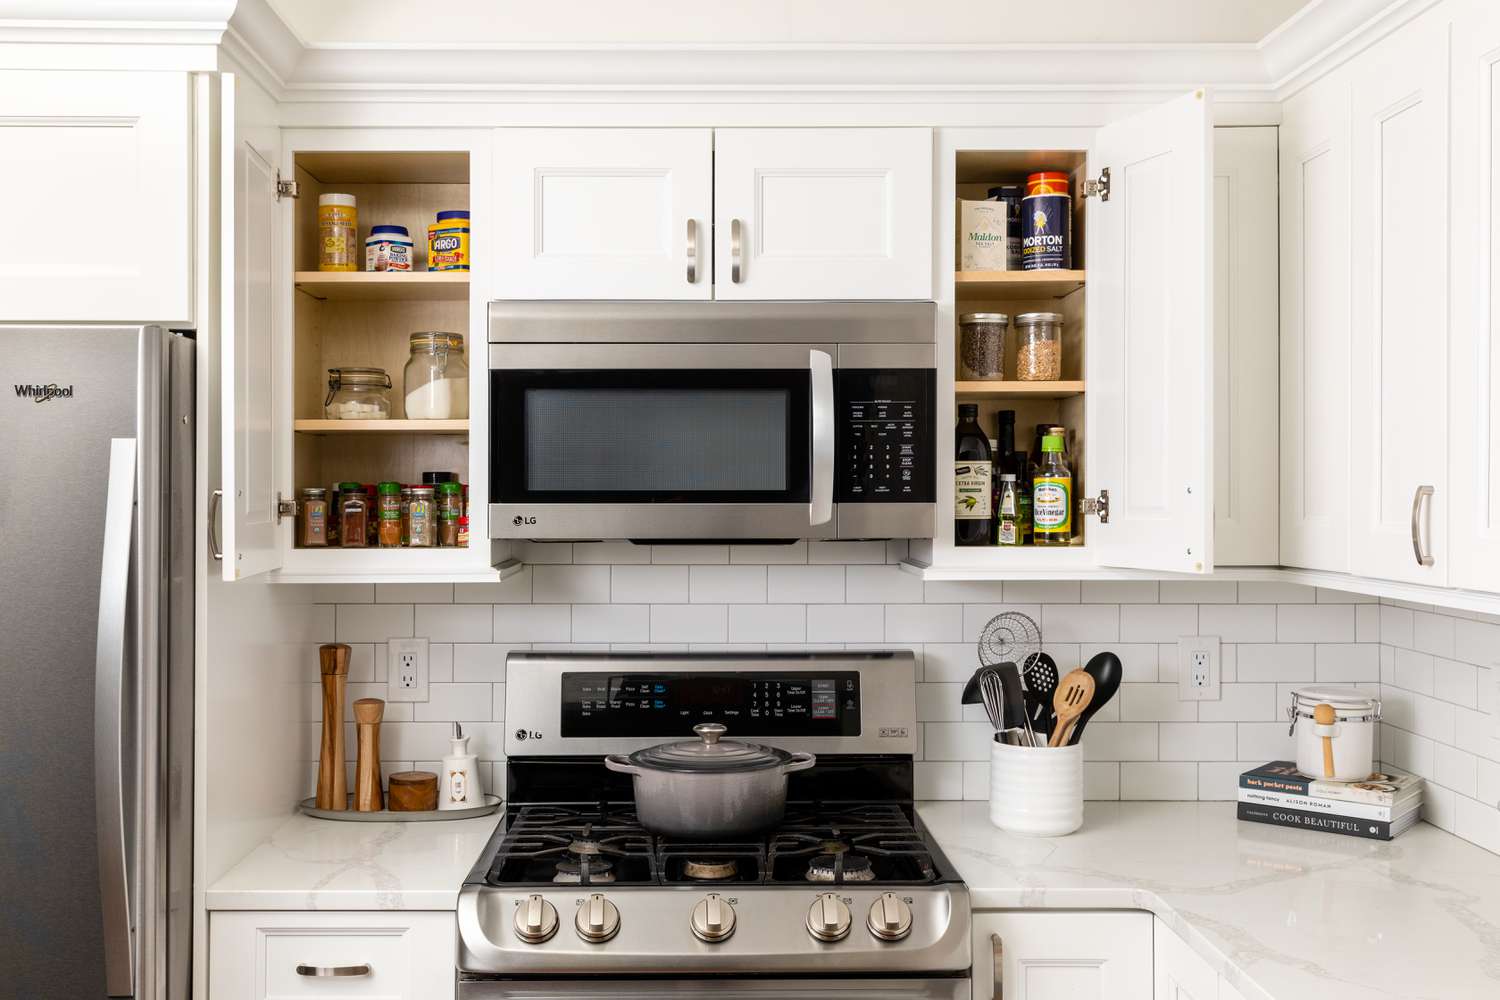 What Items Go In Kitchen Cabinets